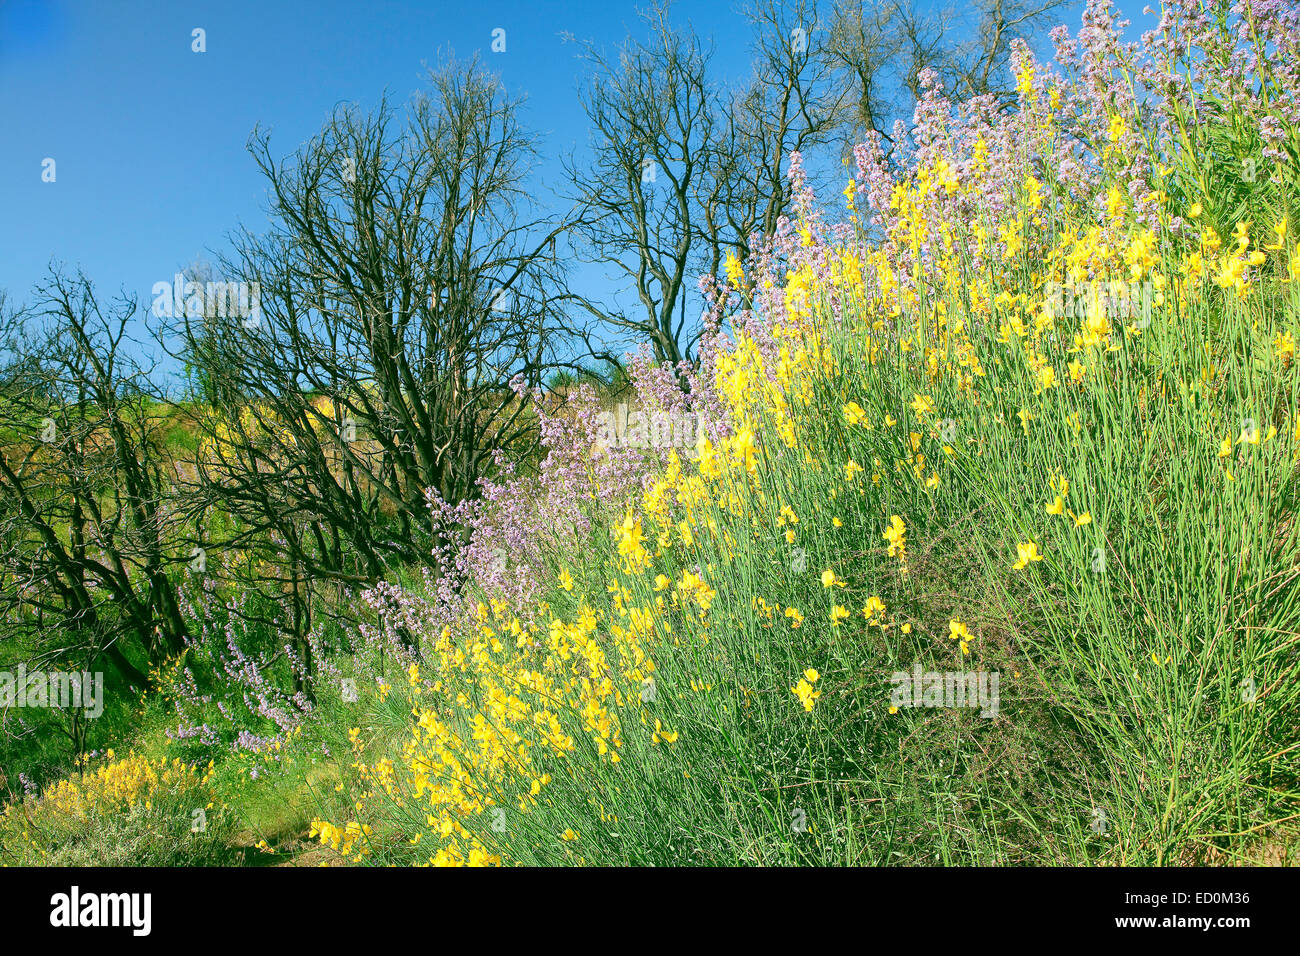 Spanish Broom (Spartium junceum) and Poodle-dog bush (Common turricula, Turricula parryi) wildflowers with a backdrop of burnt t Stock Photo